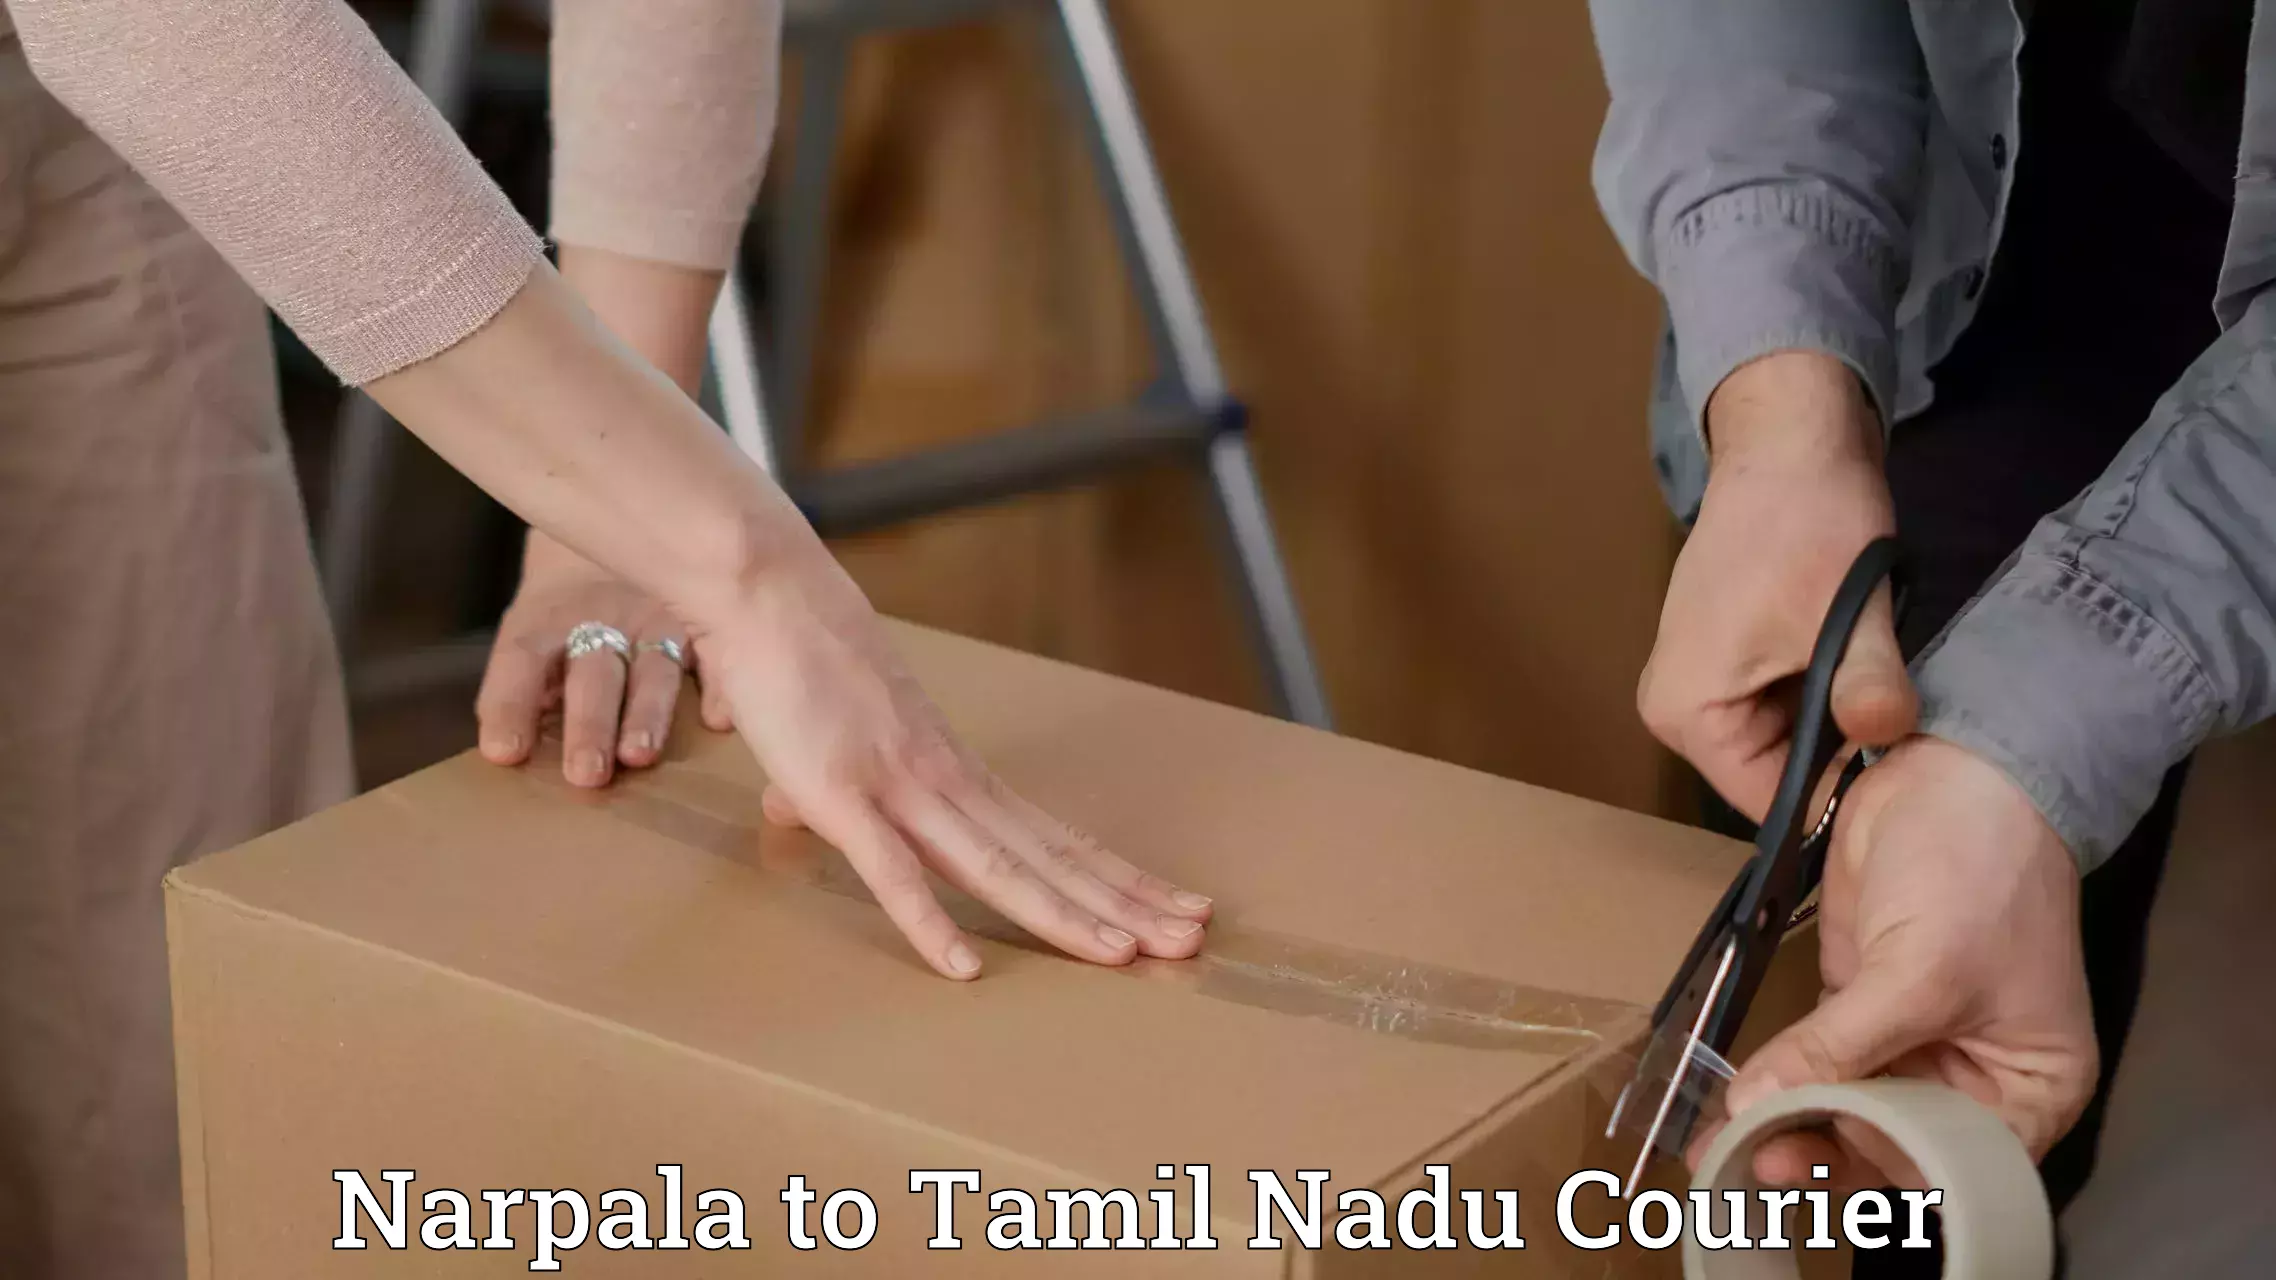 Reliable courier services in Narpala to Chennai Port